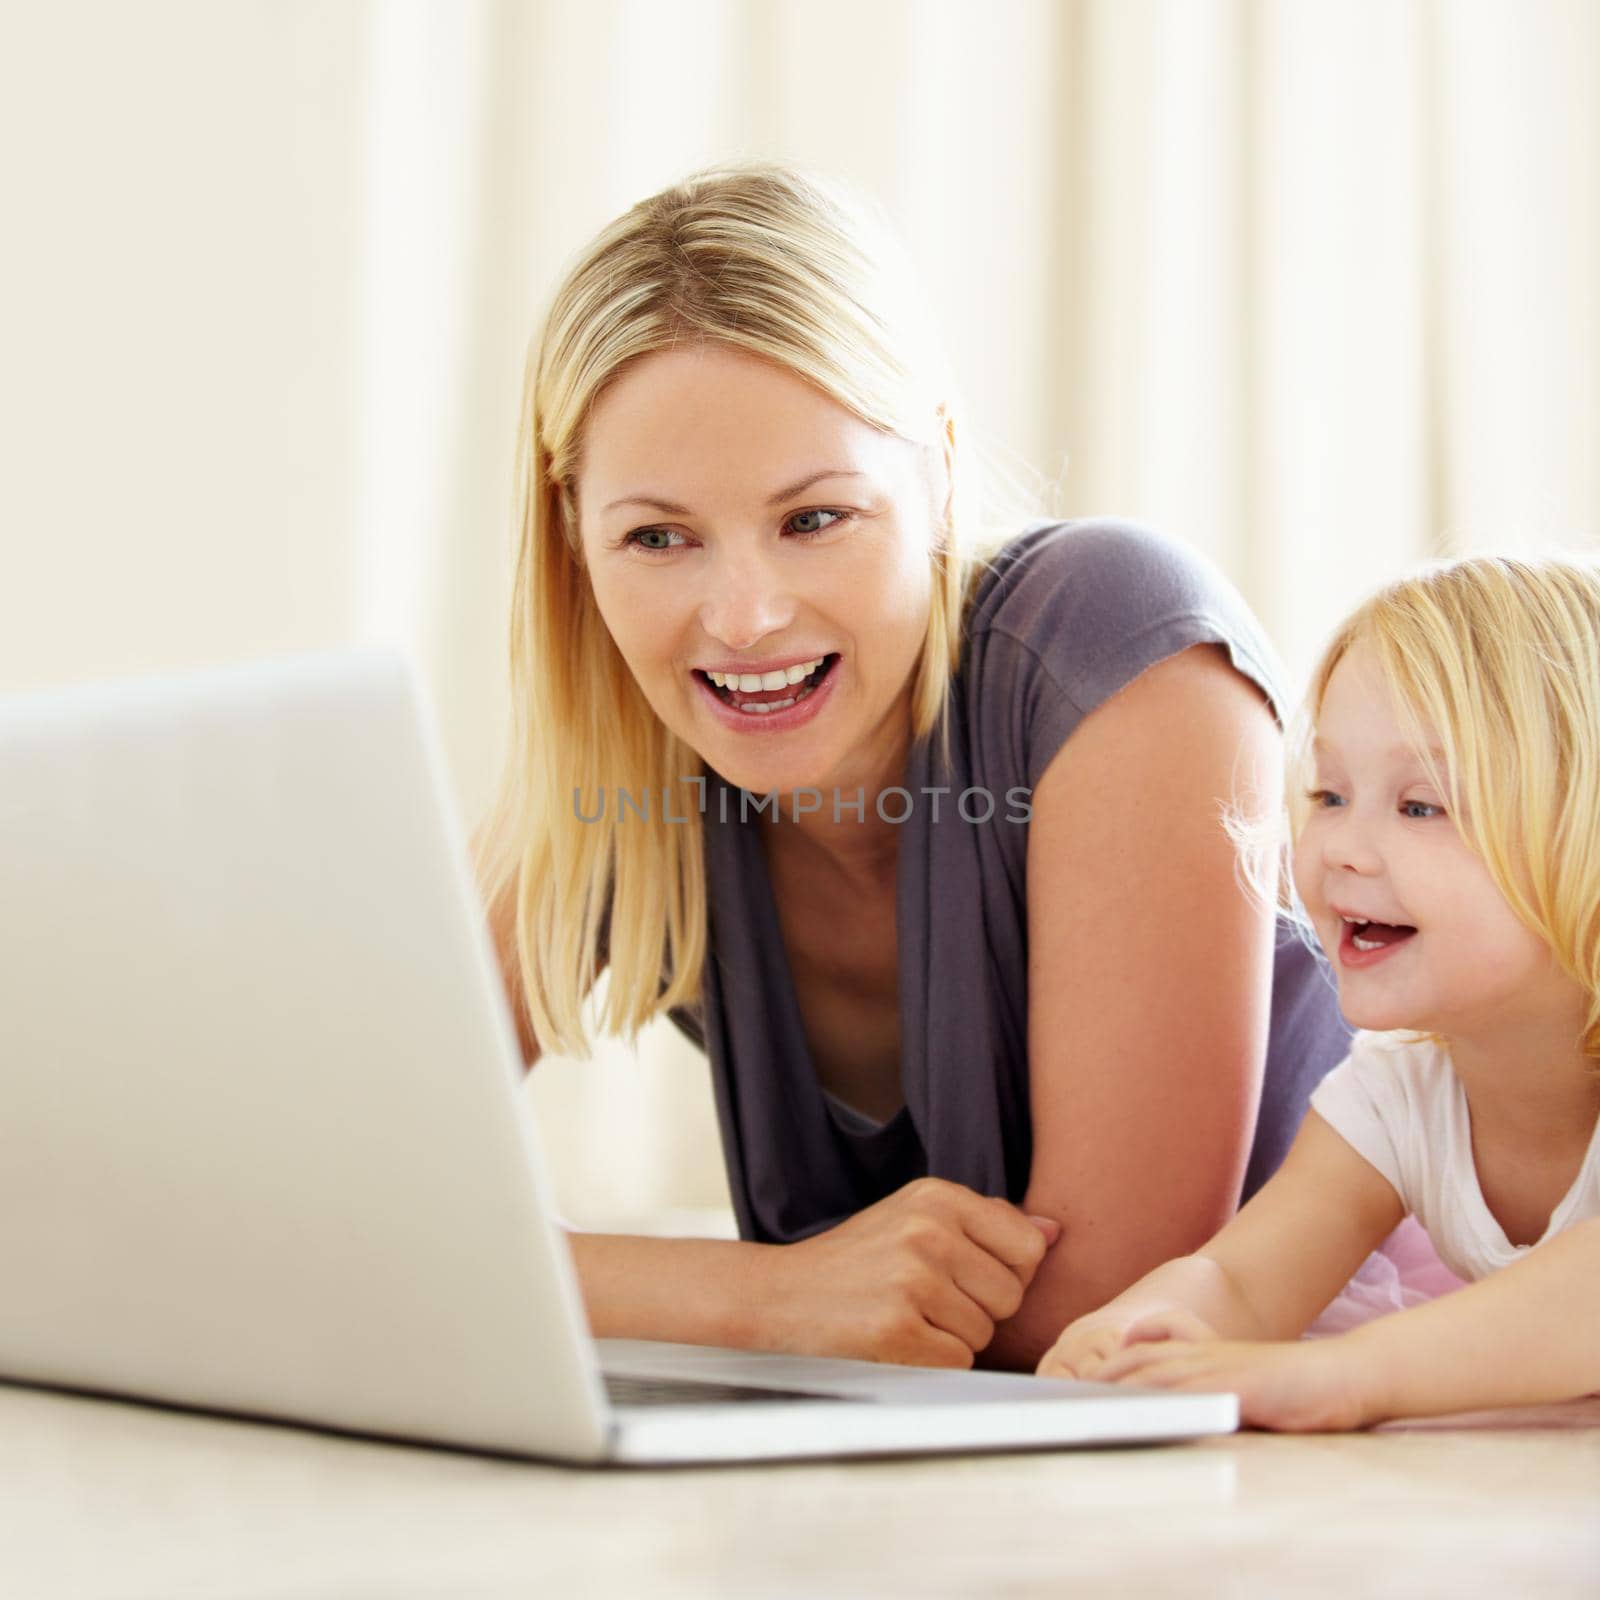 Shot of a mother and daughter bonding while surfing the internet together.